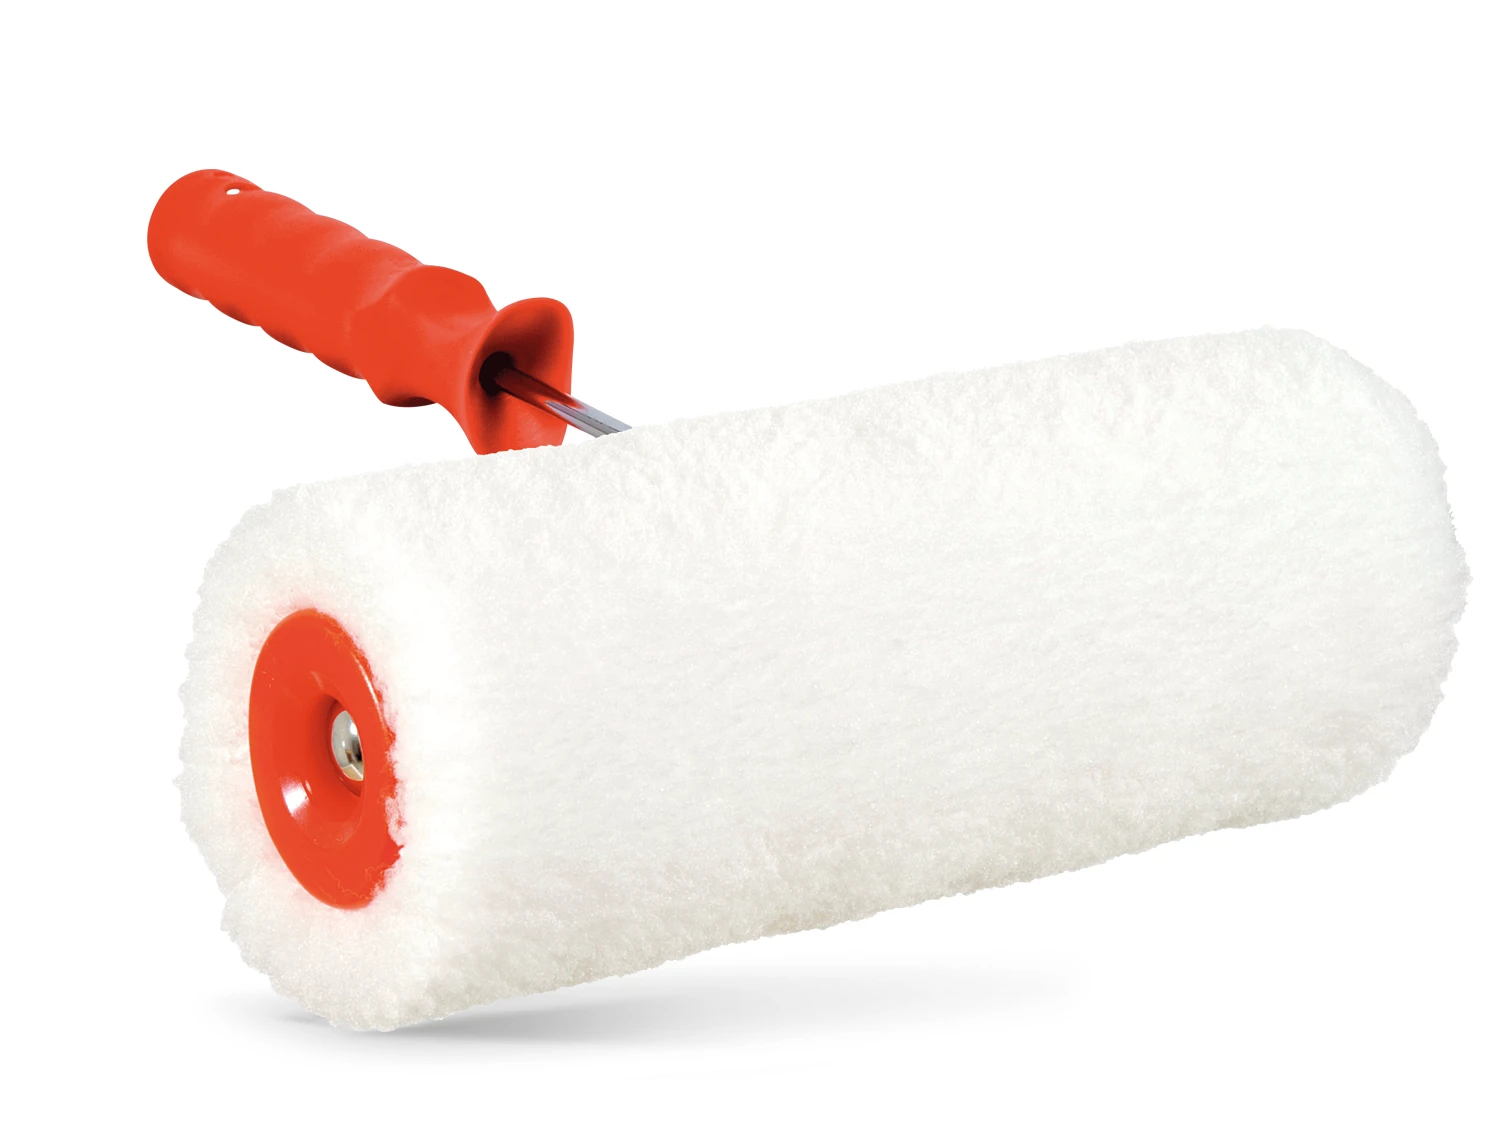 A08 – SYNTHEX PAINT ROLLER – POLYESTER CONTINUOUS THREAD